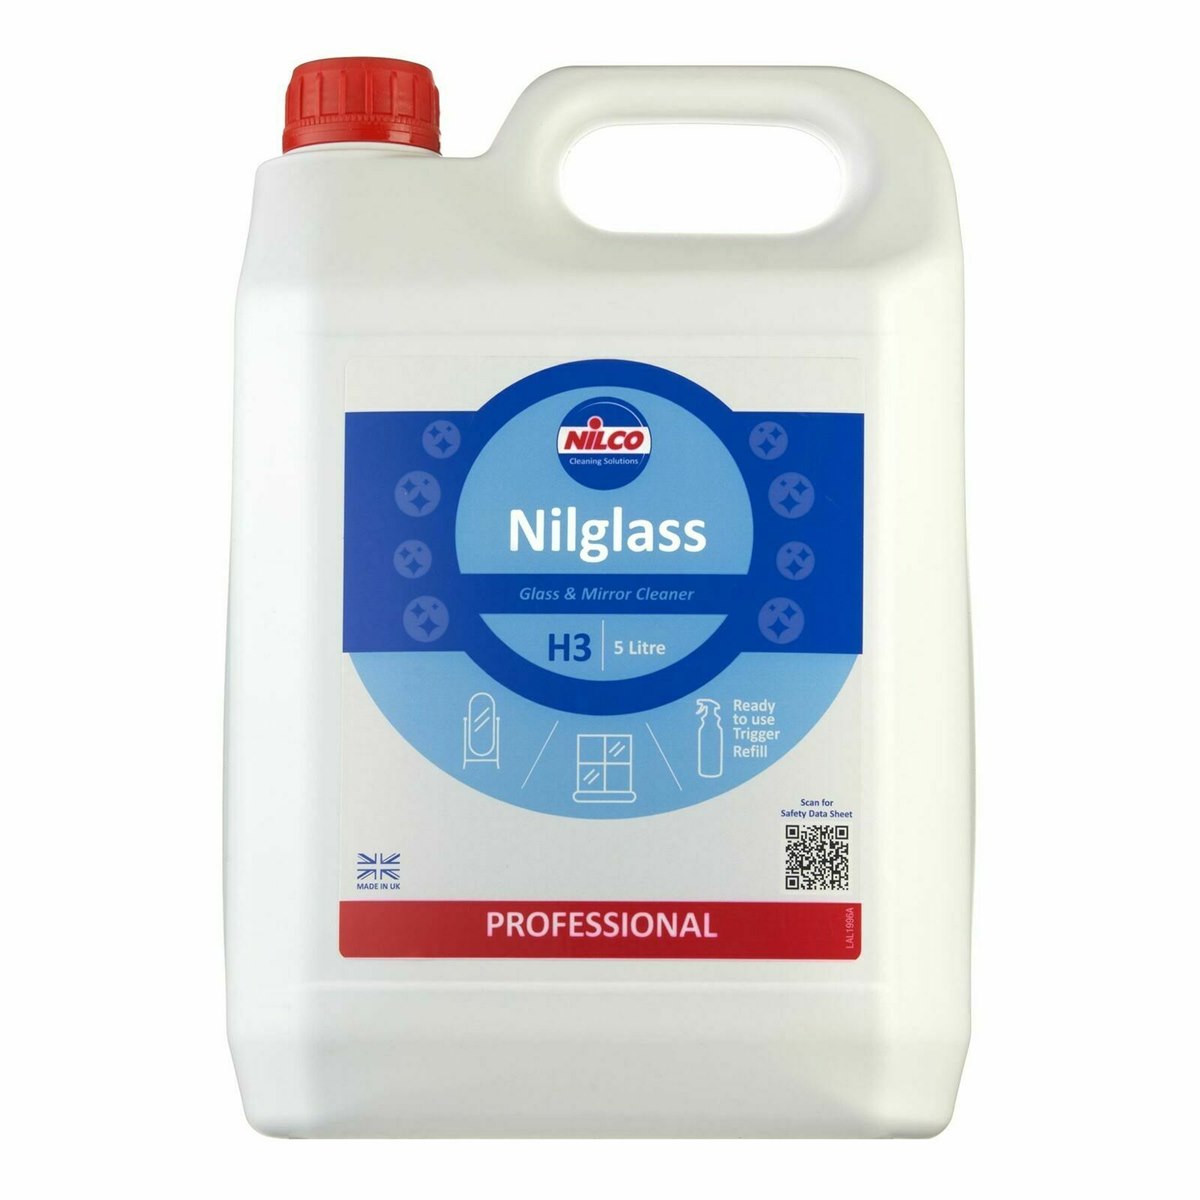 Nilglass Glass and Mirror Cleaner H3 5 Litre